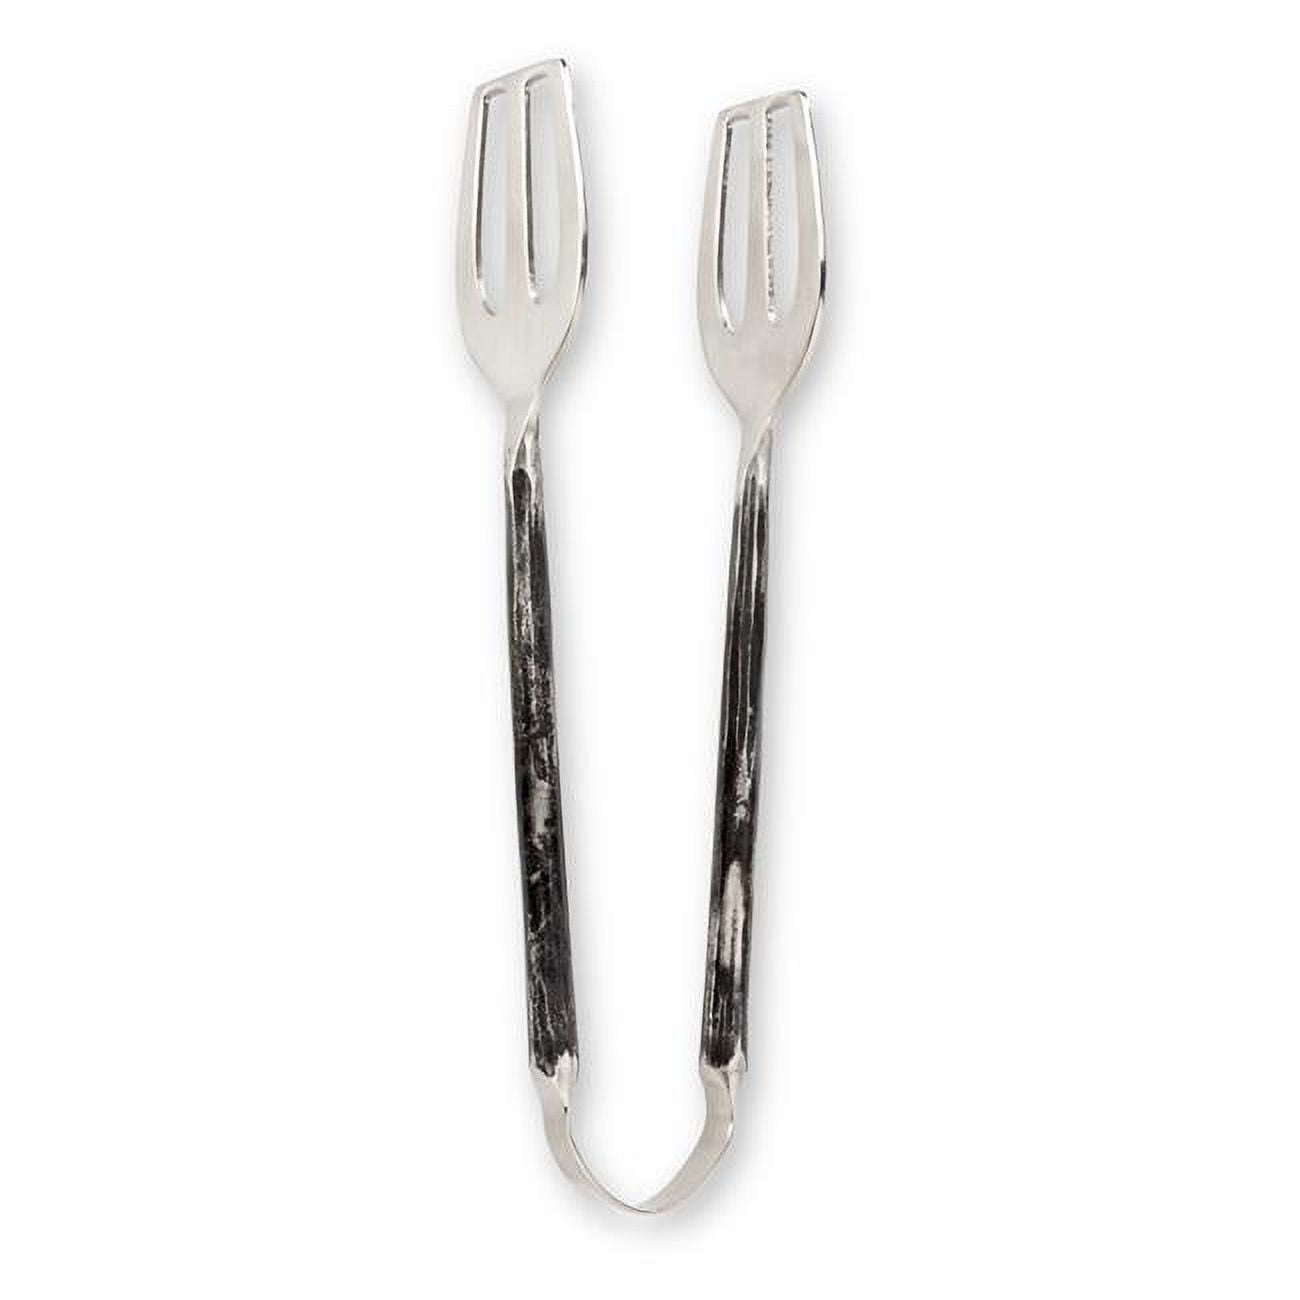 Abbott Collections AB-36-IRON-TONG 10 in. Salad Tongs with Forge Finish Handle, Antique Black